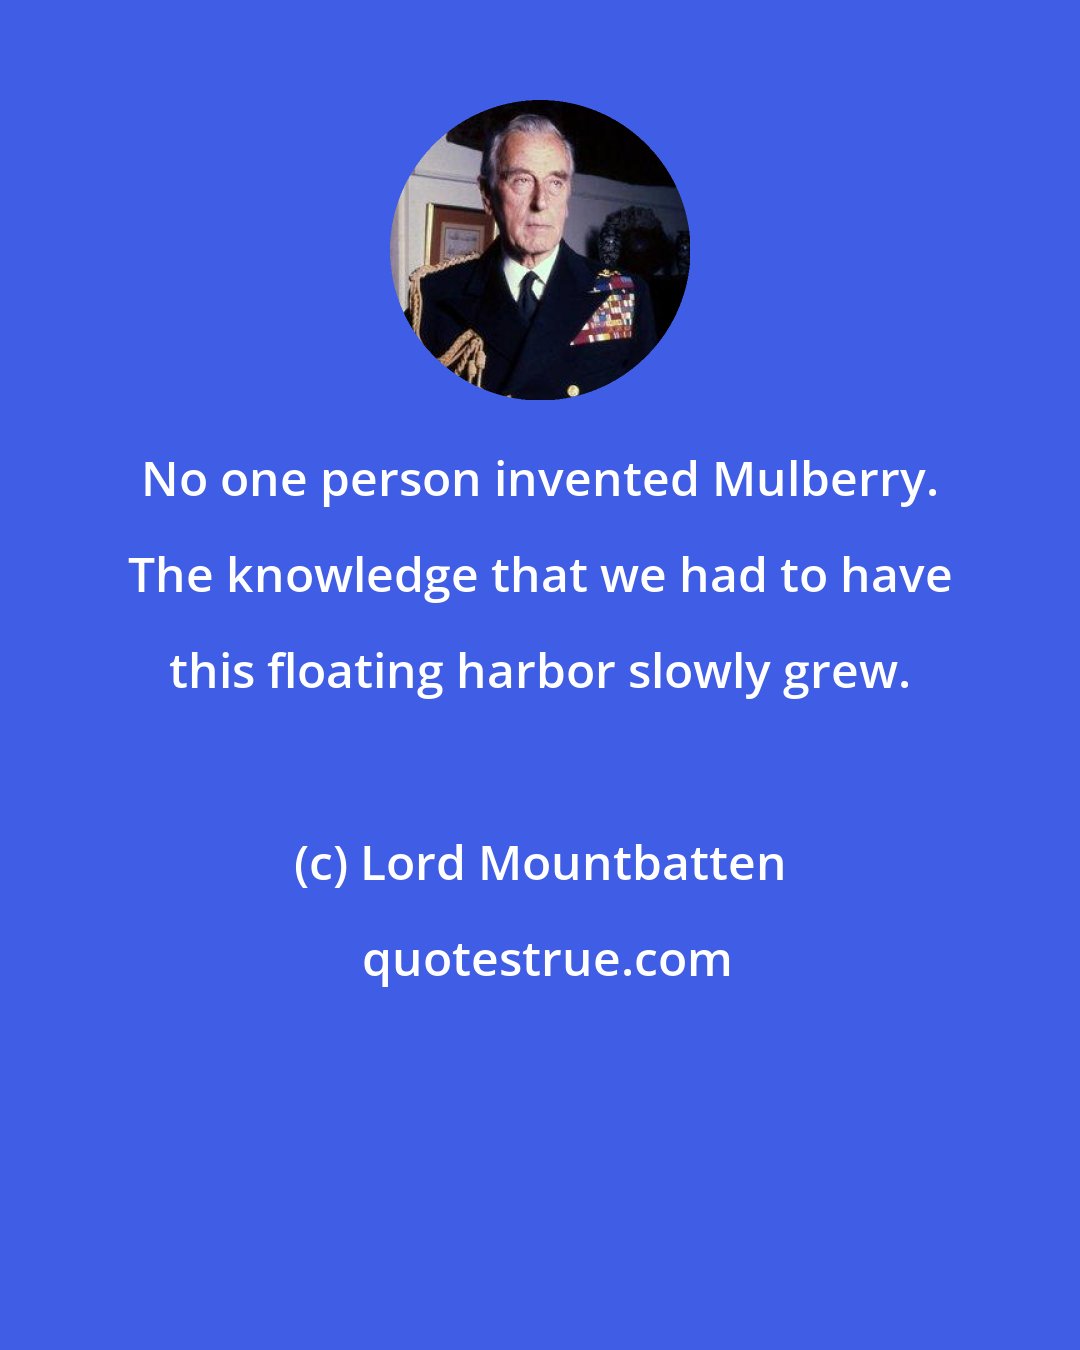 Lord Mountbatten: No one person invented Mulberry. The knowledge that we had to have this floating harbor slowly grew.